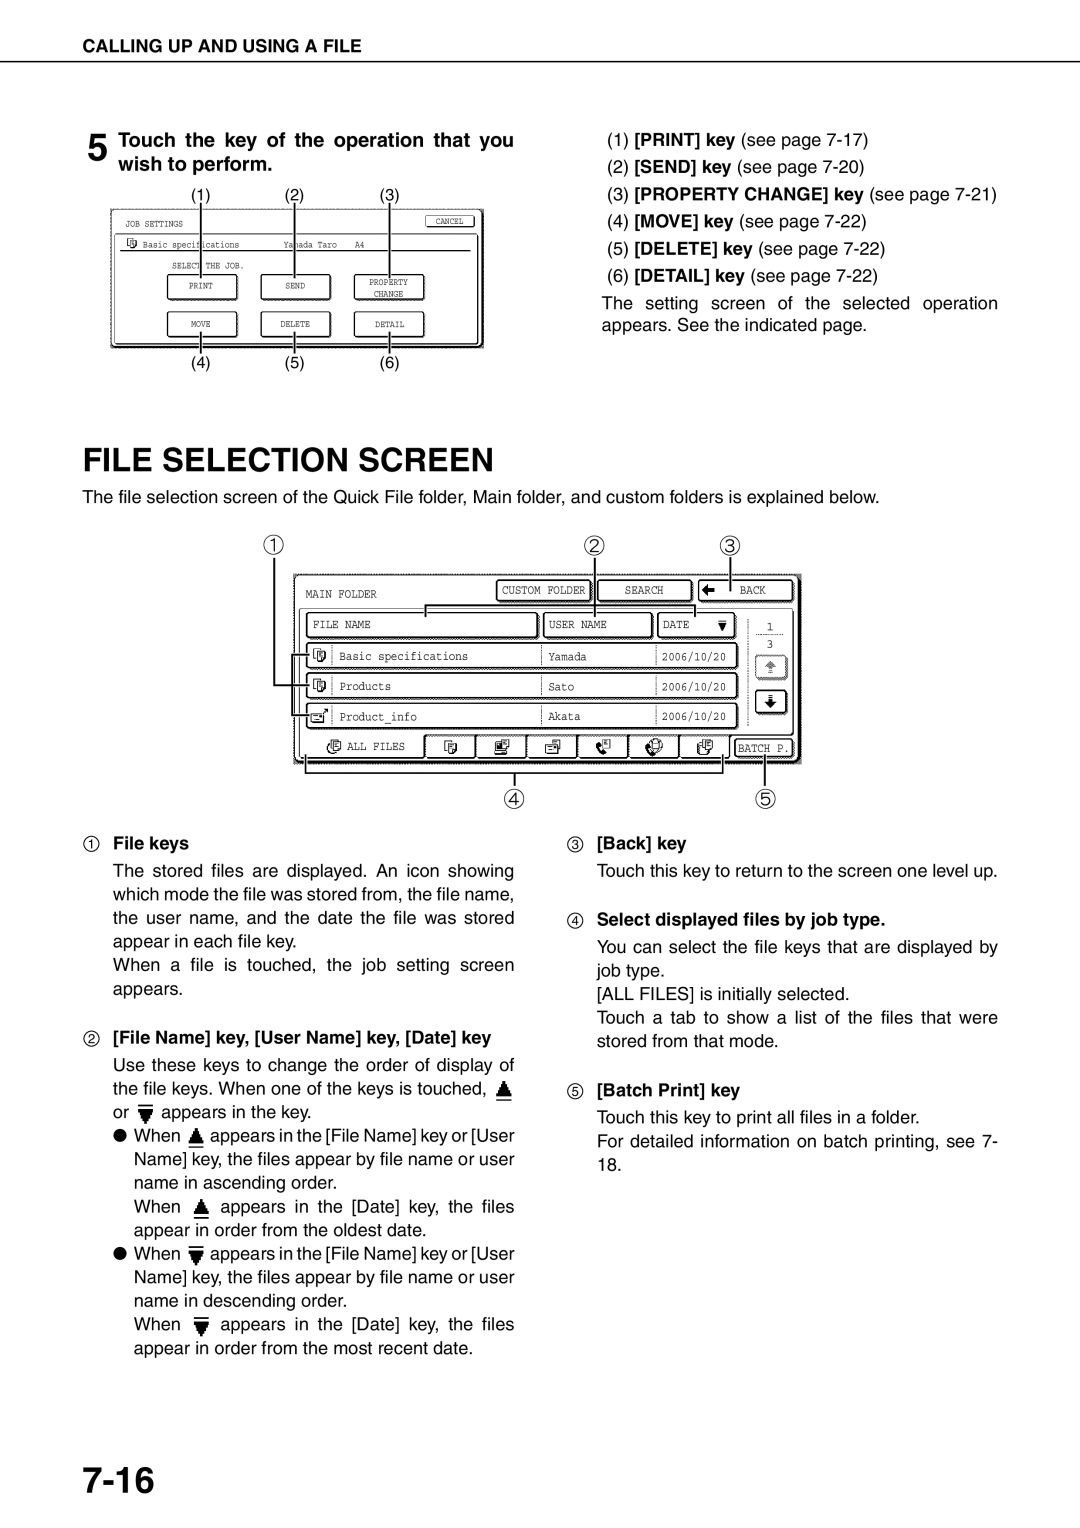 Sharp MX-M700N 7-16, File Selection Screen, Touch the key of the operation that you wish to perform, File keys, Back key 